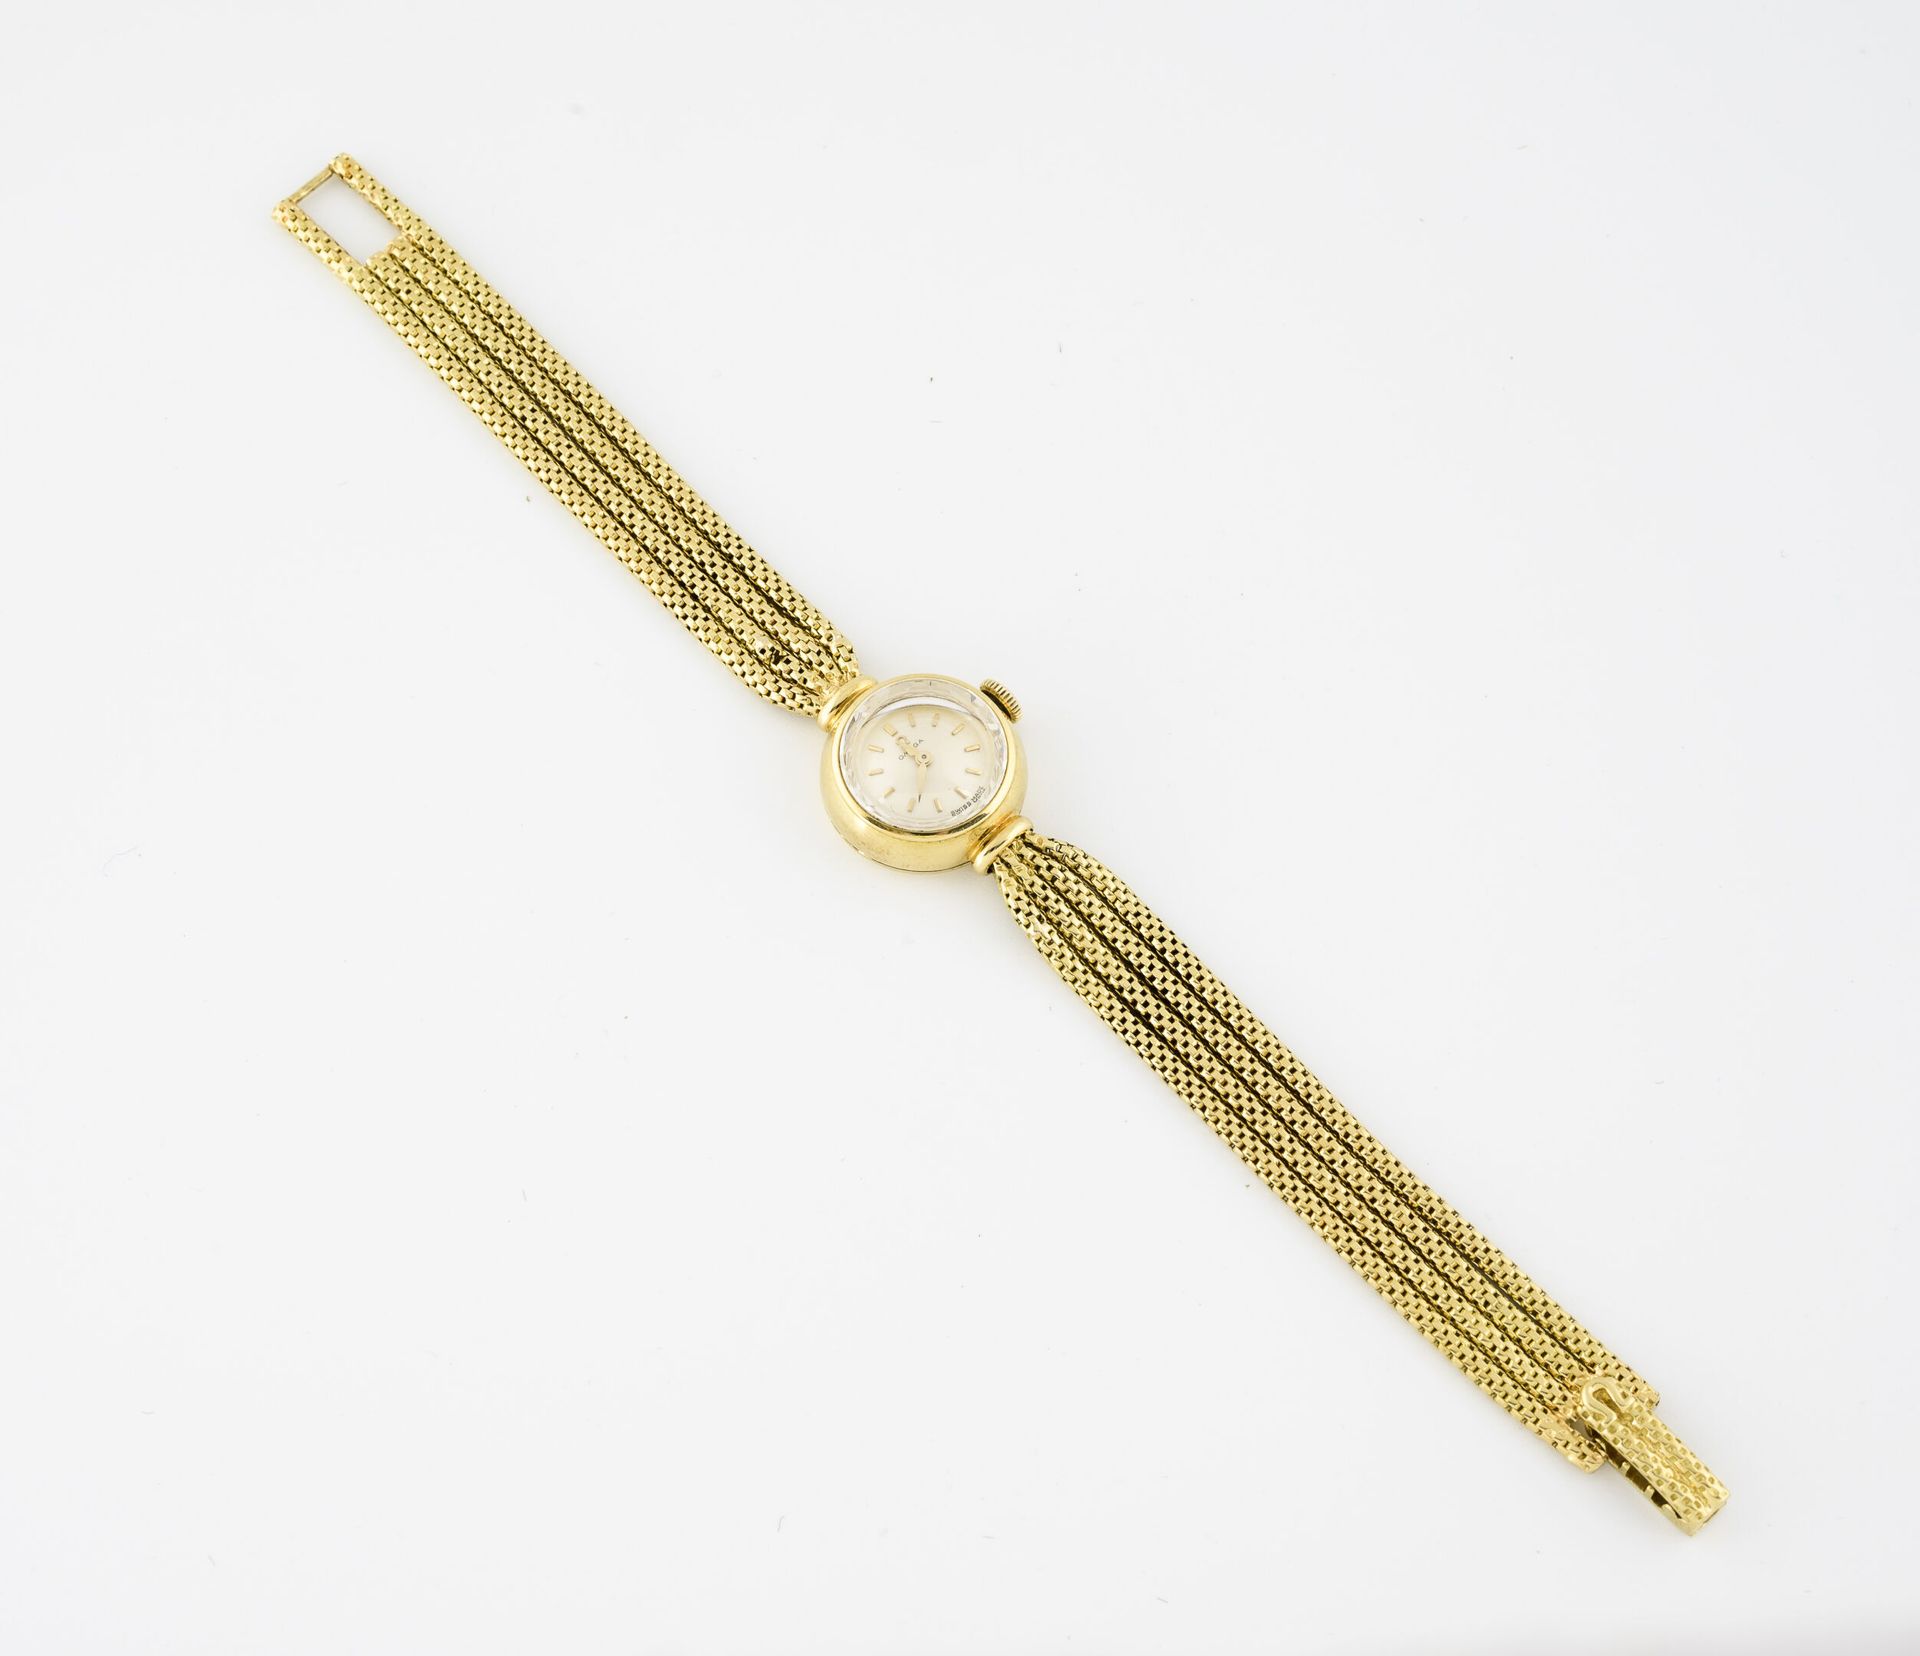 OMEGA Ladies' wristwatch in yellow gold (750).

Round case.

Dial with satin-bru&hellip;